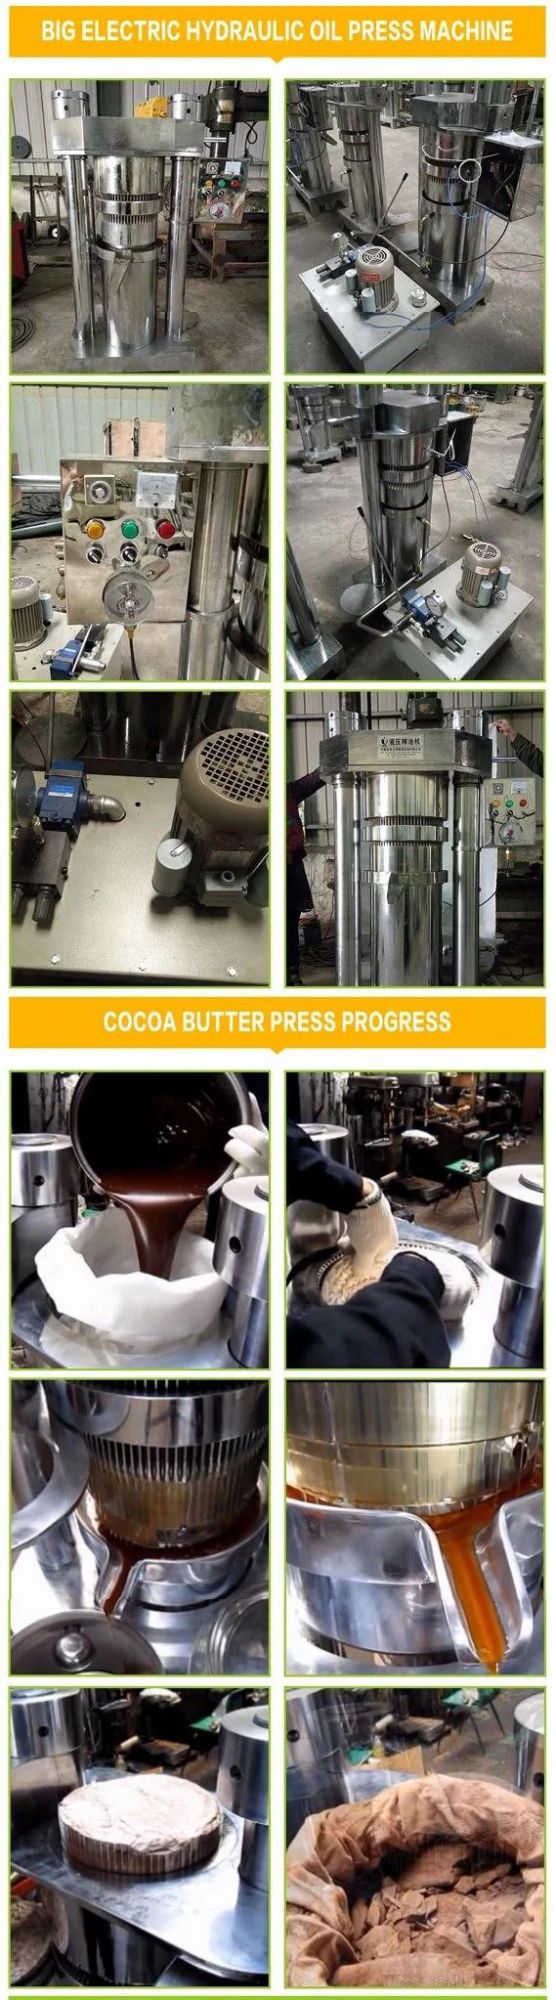 Hot Selling Nigeria Coconut Oil Processing Prickly Pear Seed Oil Extraction Machine